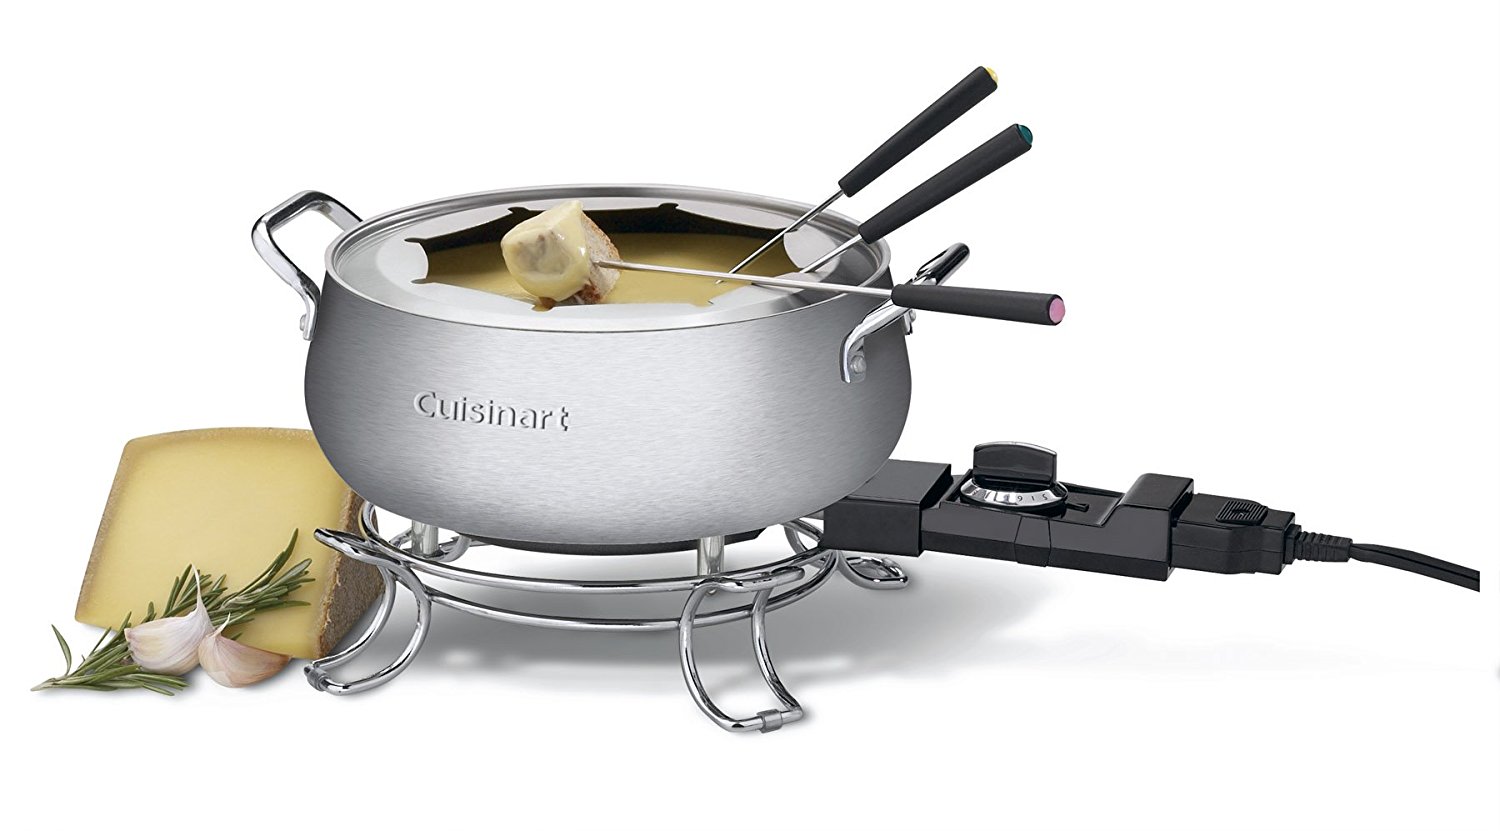 Cuisinart CFO-3SS, 3-Quart Electric Fondue Pot with Forks, Stainless Steel - image 2 of 6